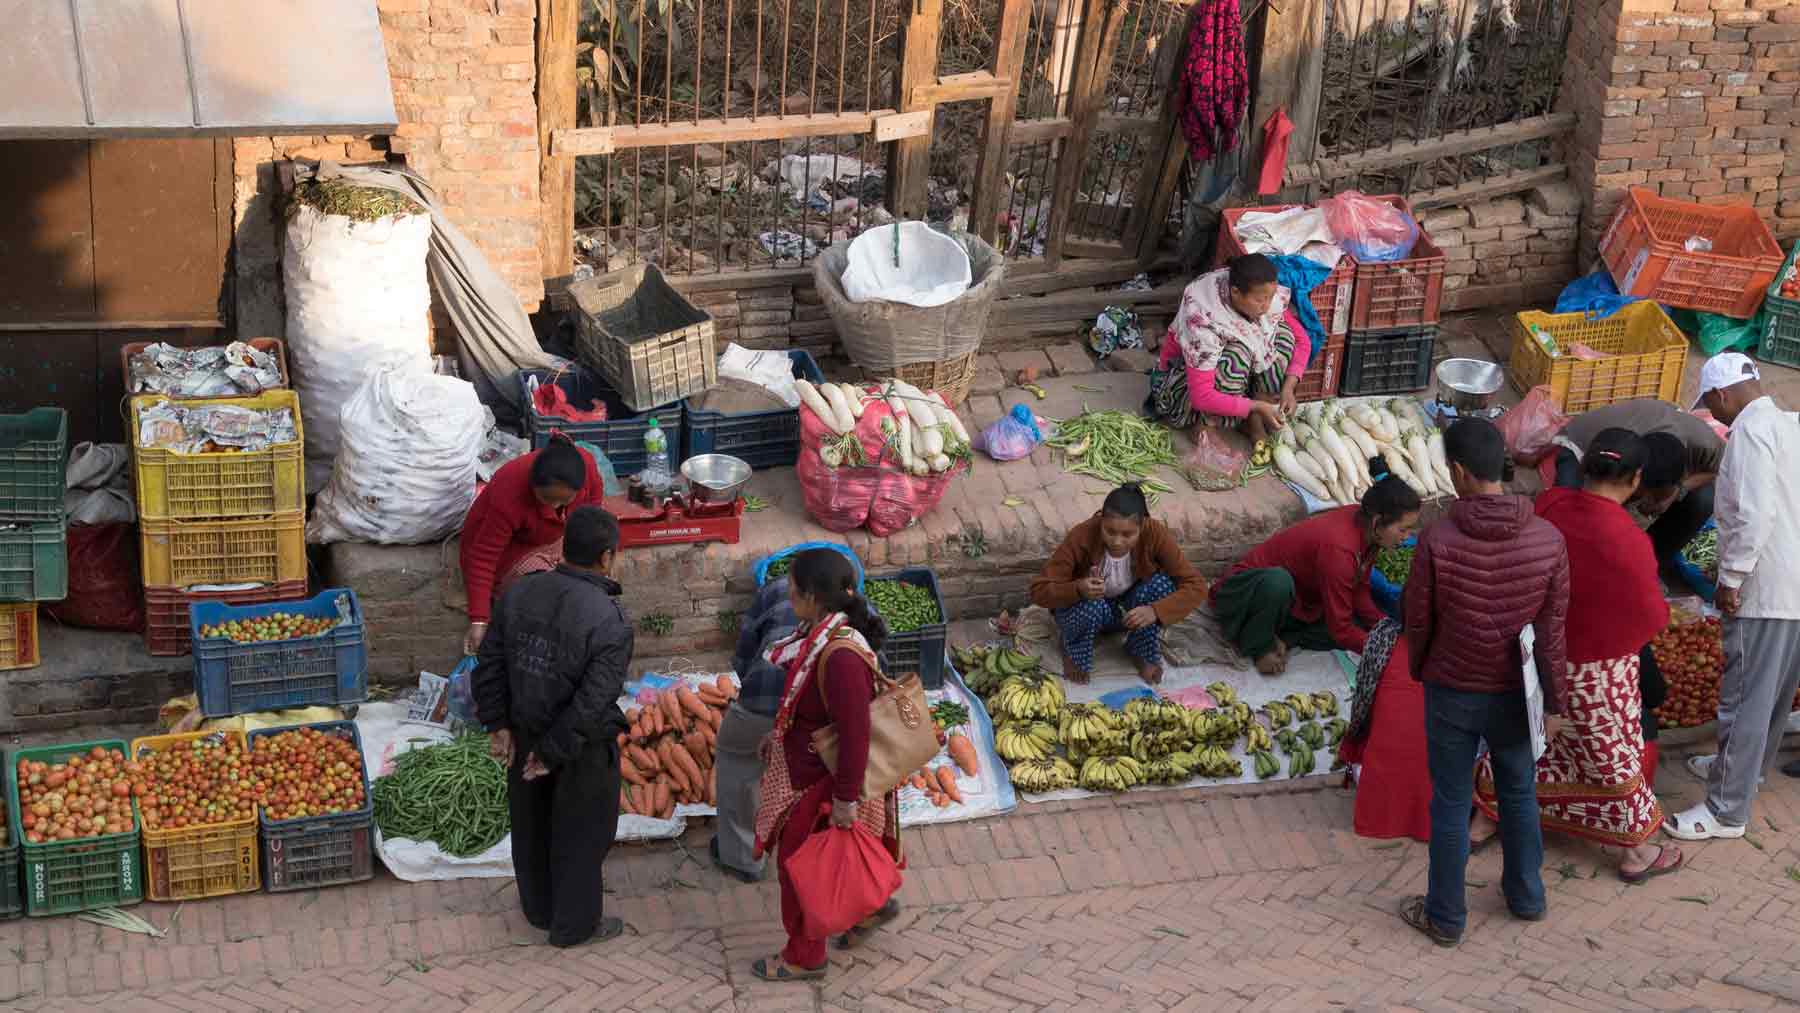 Group discussing the vegetables for sale in the square in Bhaktapur Nepal